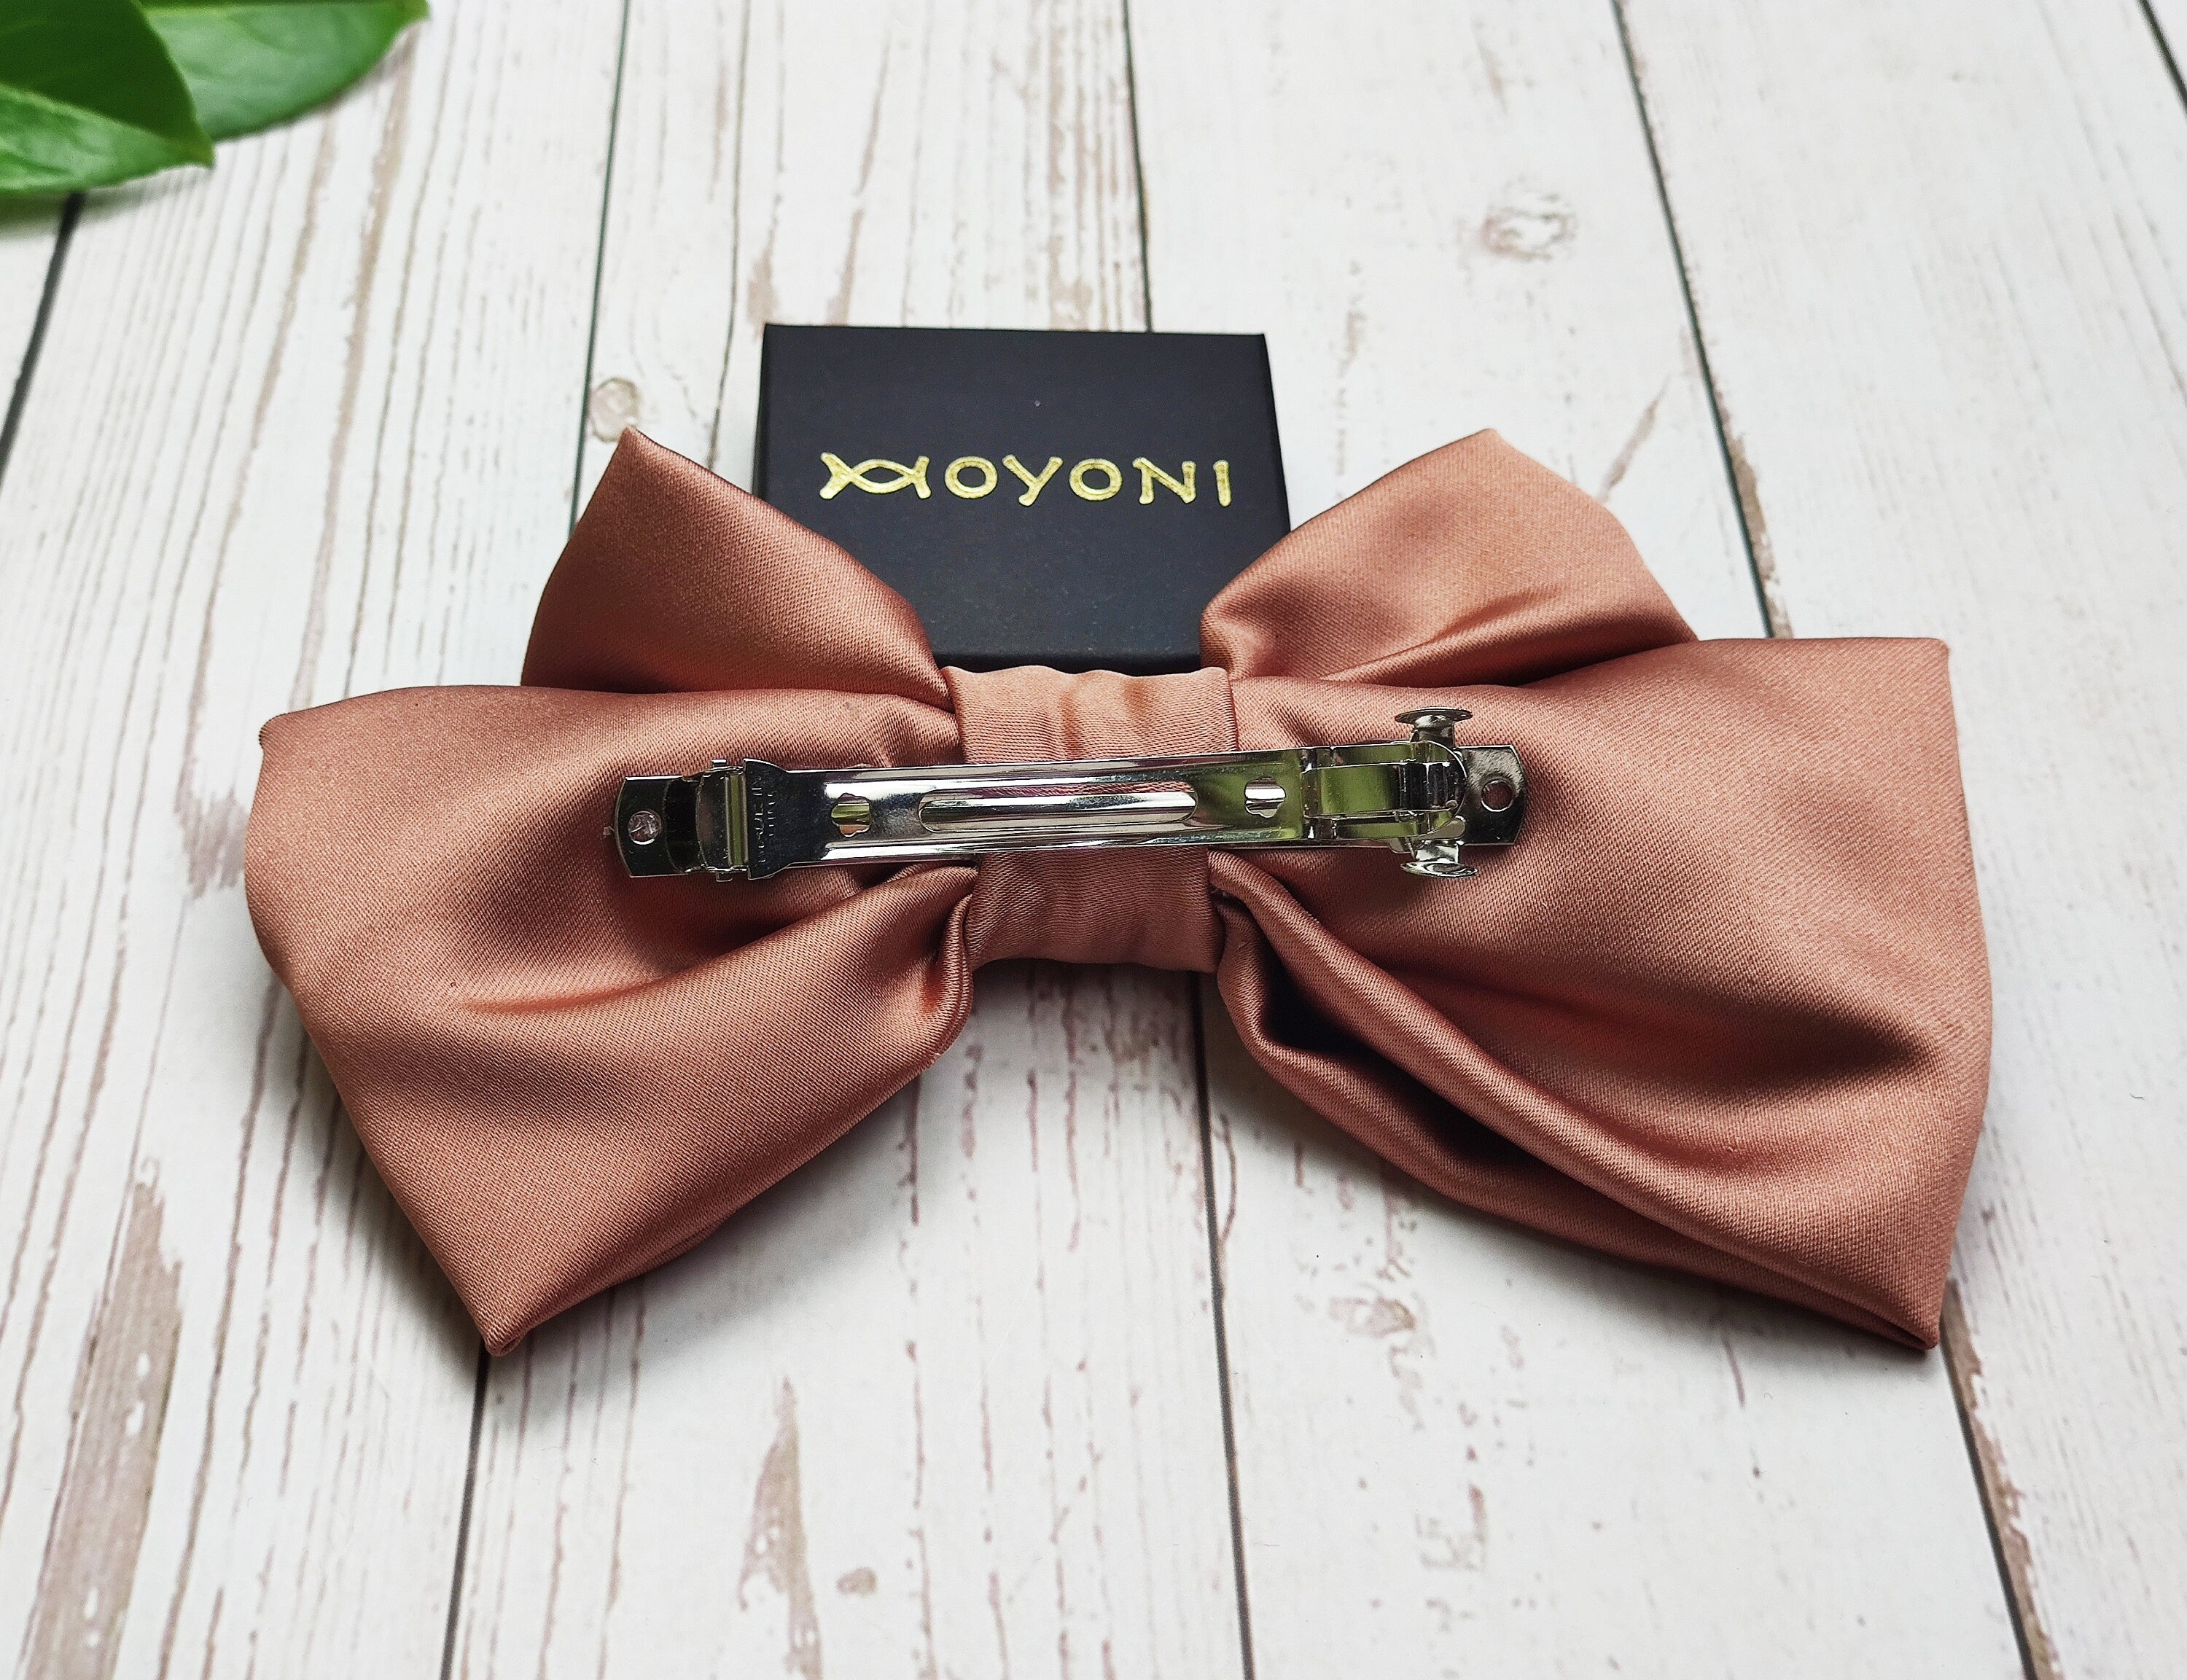 Add a pop of color to your hairstyle with these handmade brick and beige satin hair clips with a bow. The fashionable hair accessory is perfect for keeping your hair in place and adding a touch of style to any outfit.